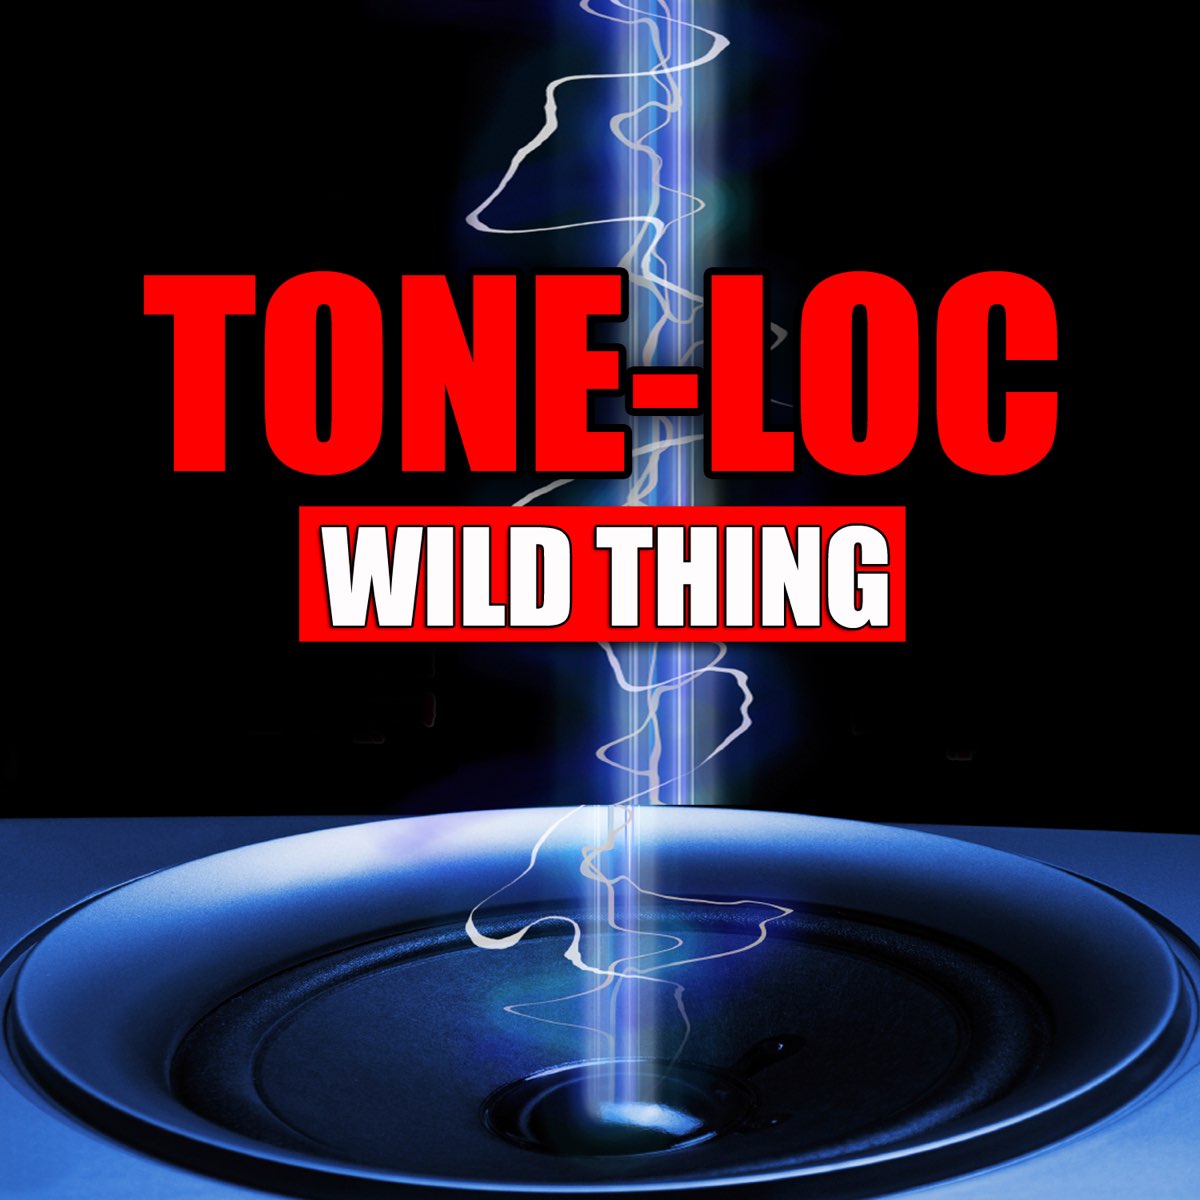 Wild Thing (Re-Recorded / Remastered) by Tone-Loc on Apple Music